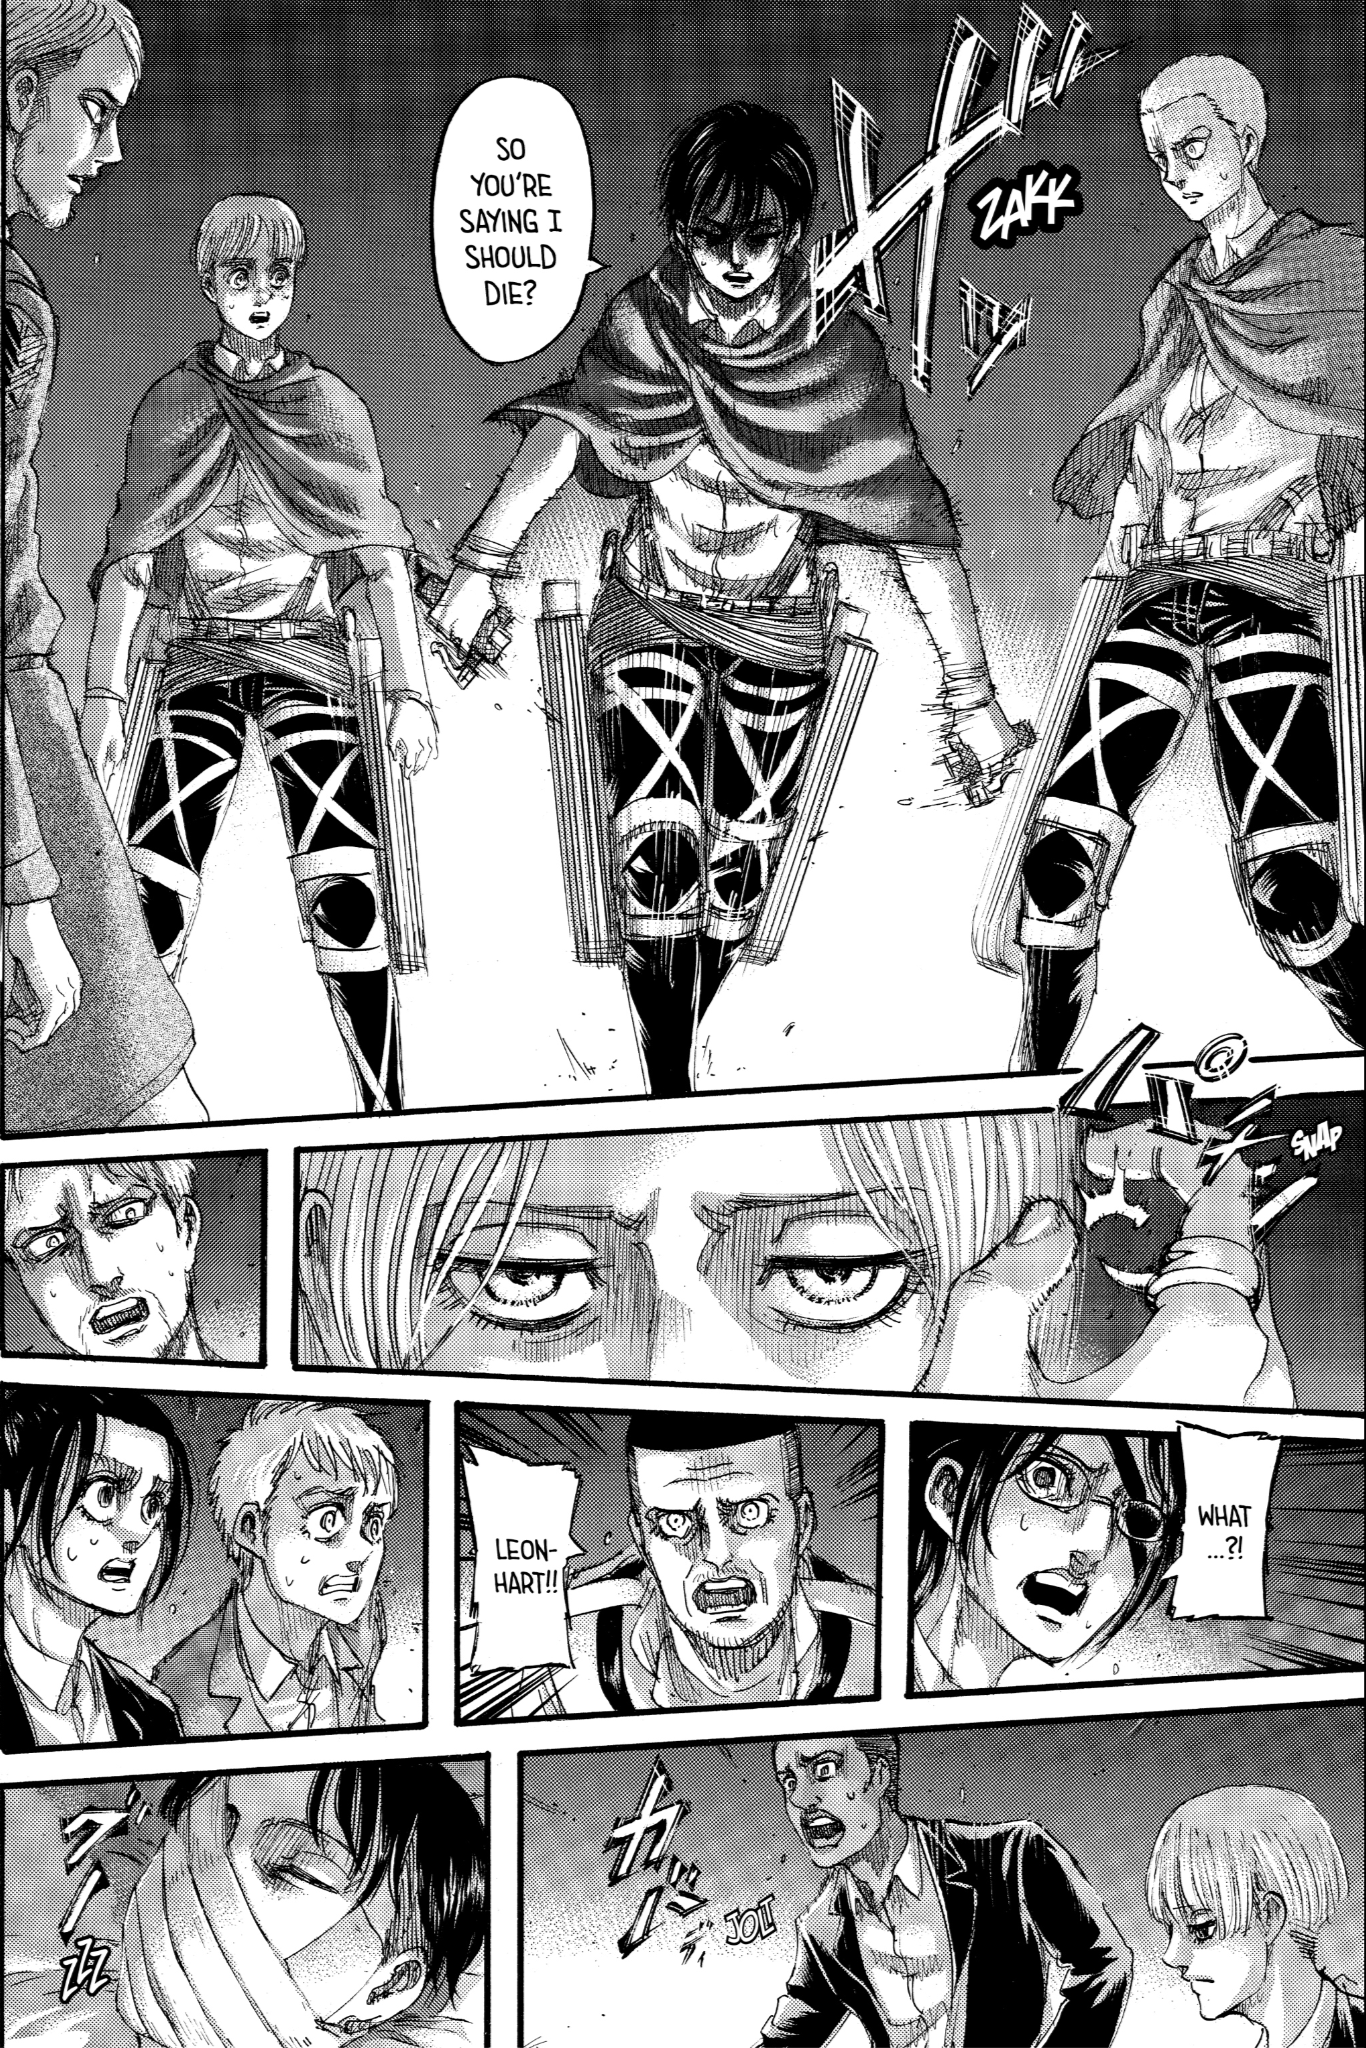 Mikasa faces Annie in Attack On Titan manga Chapter 127